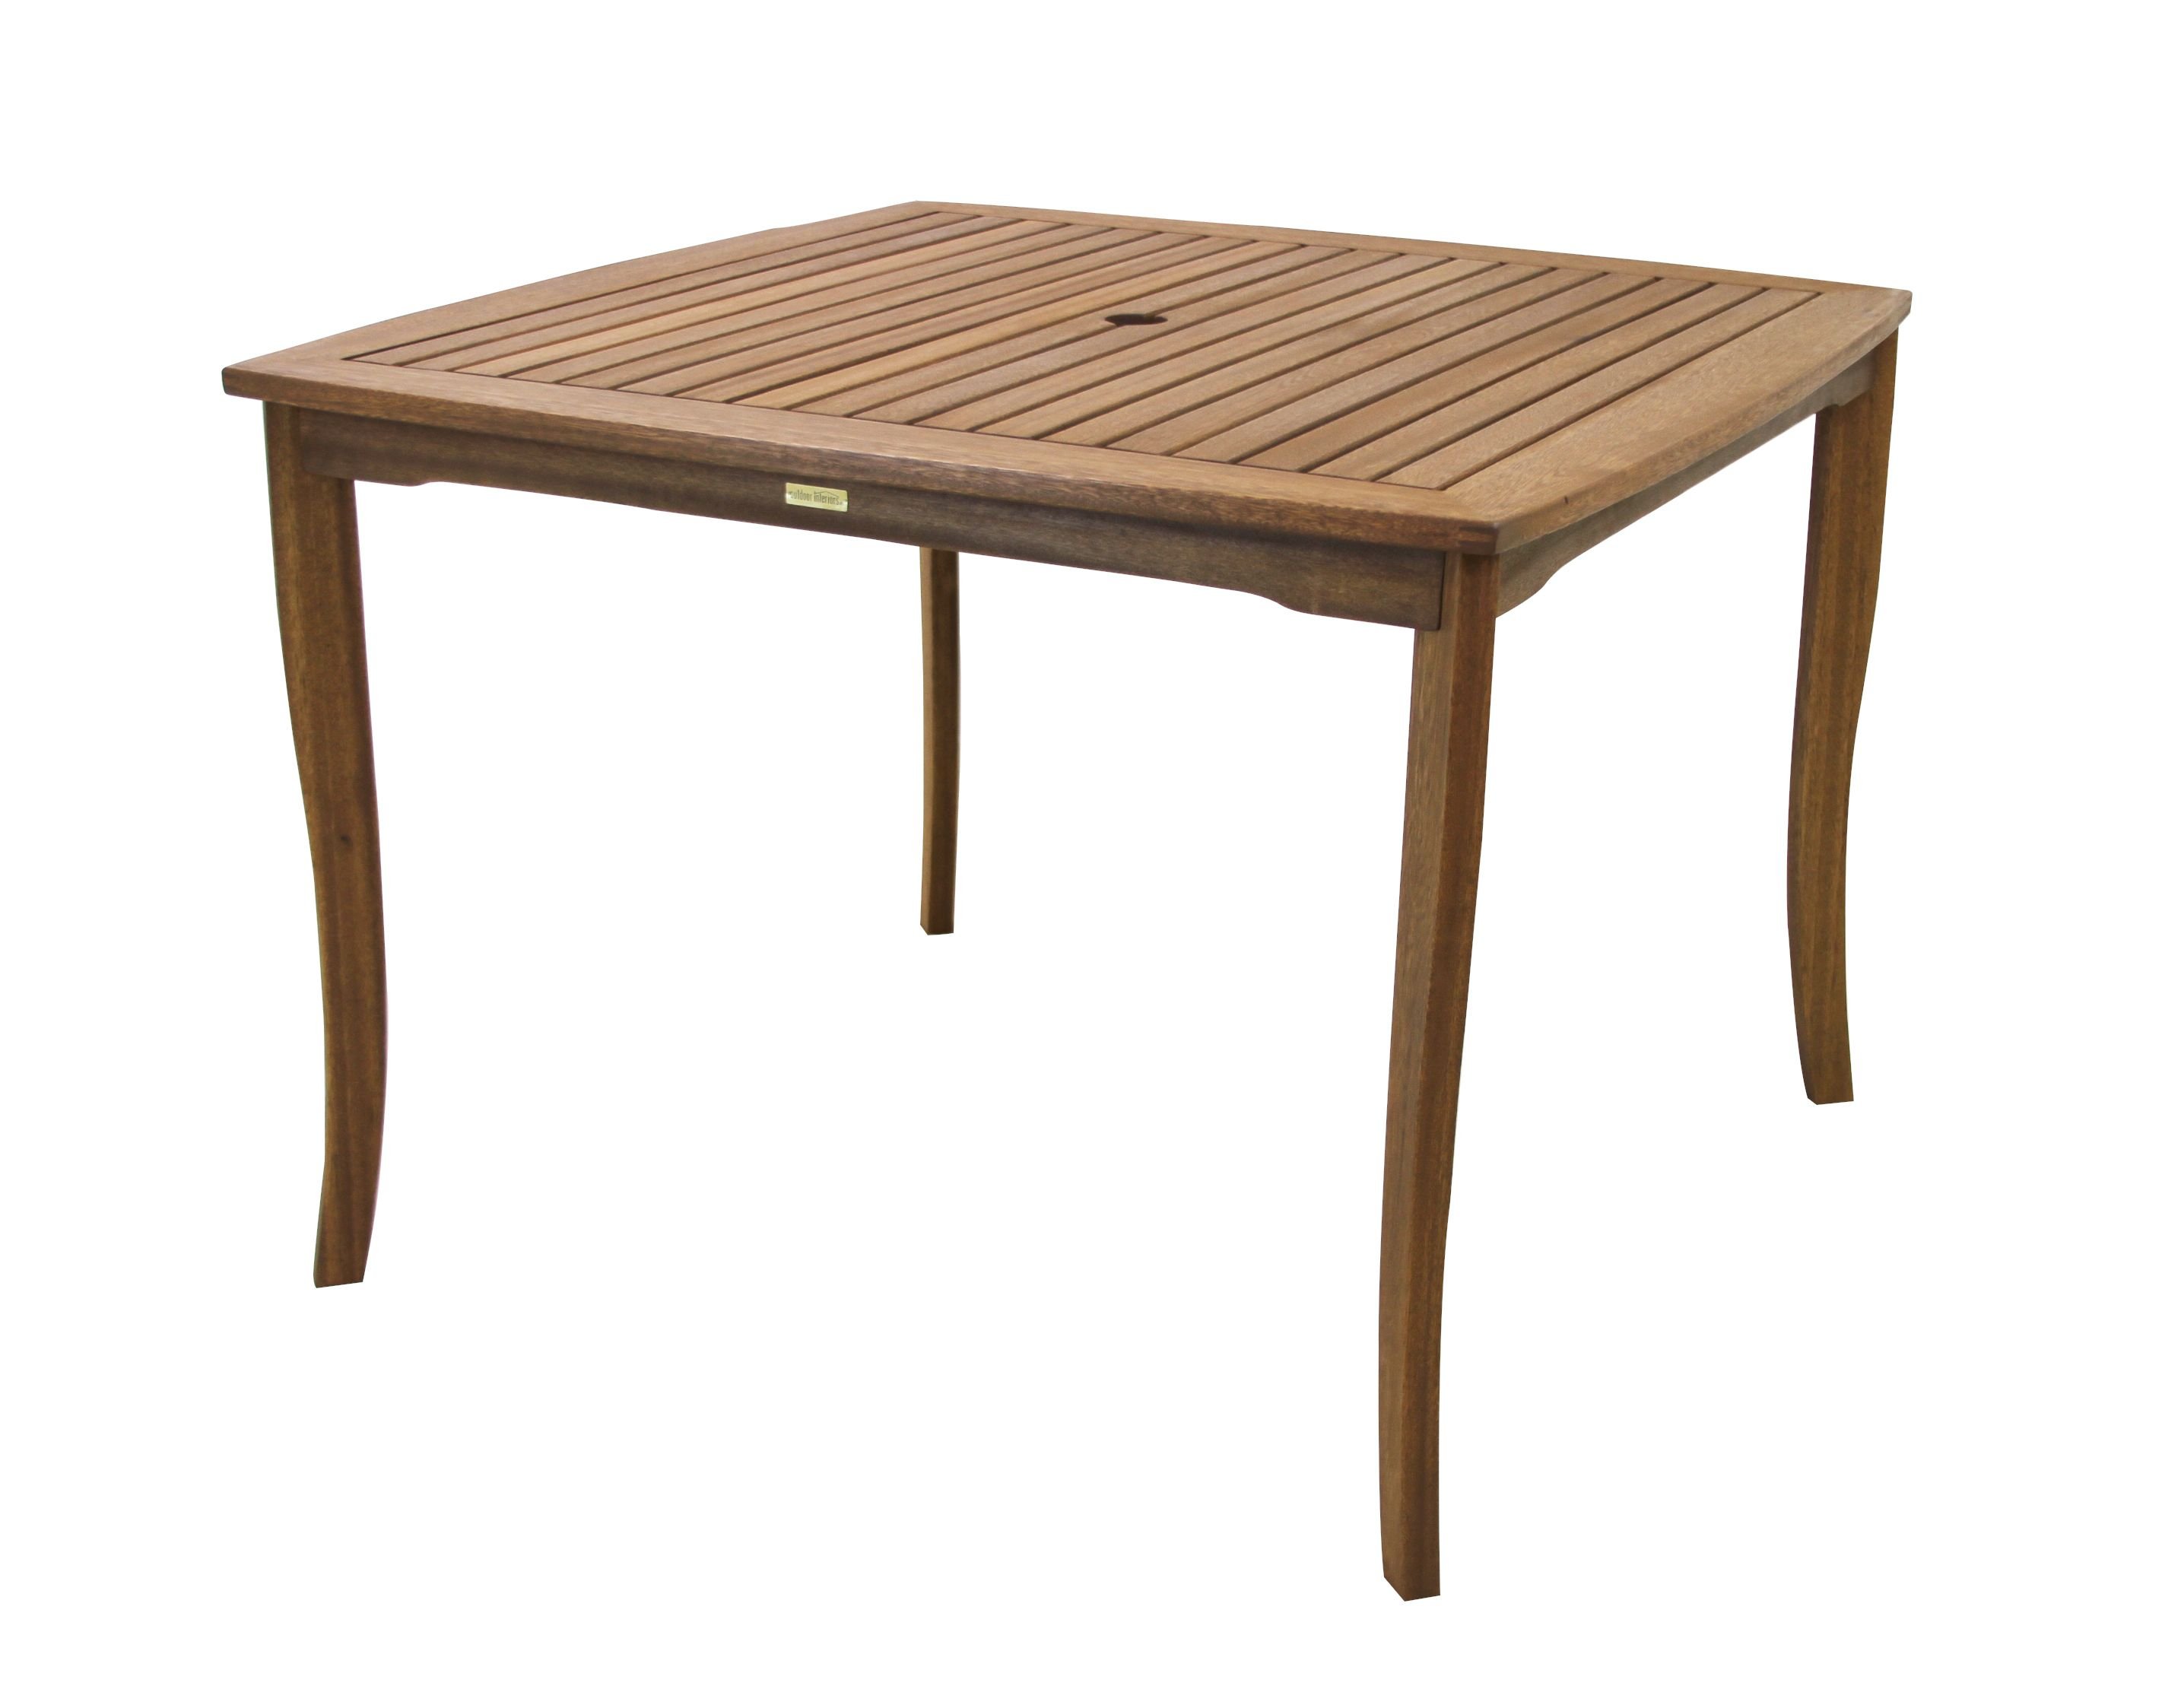 Outdoor Interiors 42" Square Eucalyptus Dining Table